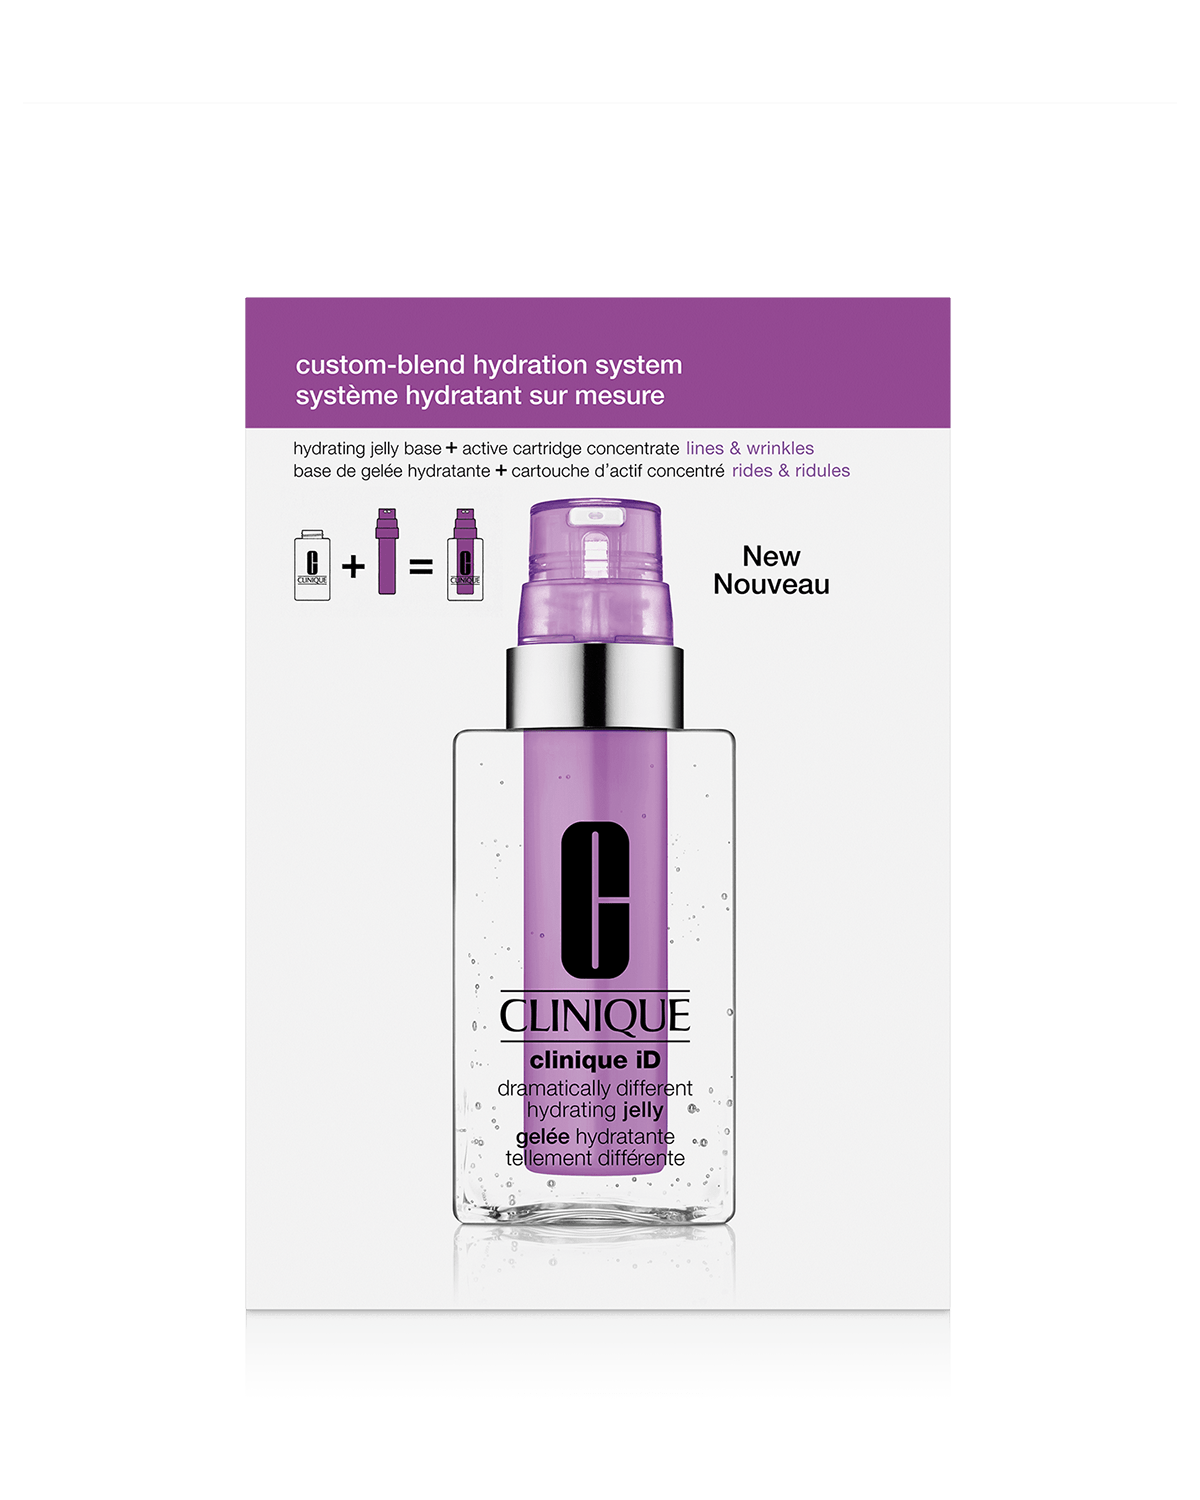 Clinique iD Dramatically Different™ Hydrating Jelly + Clinique iD™: Active Cartridge Concentrate™ for Lines & Wrinkles